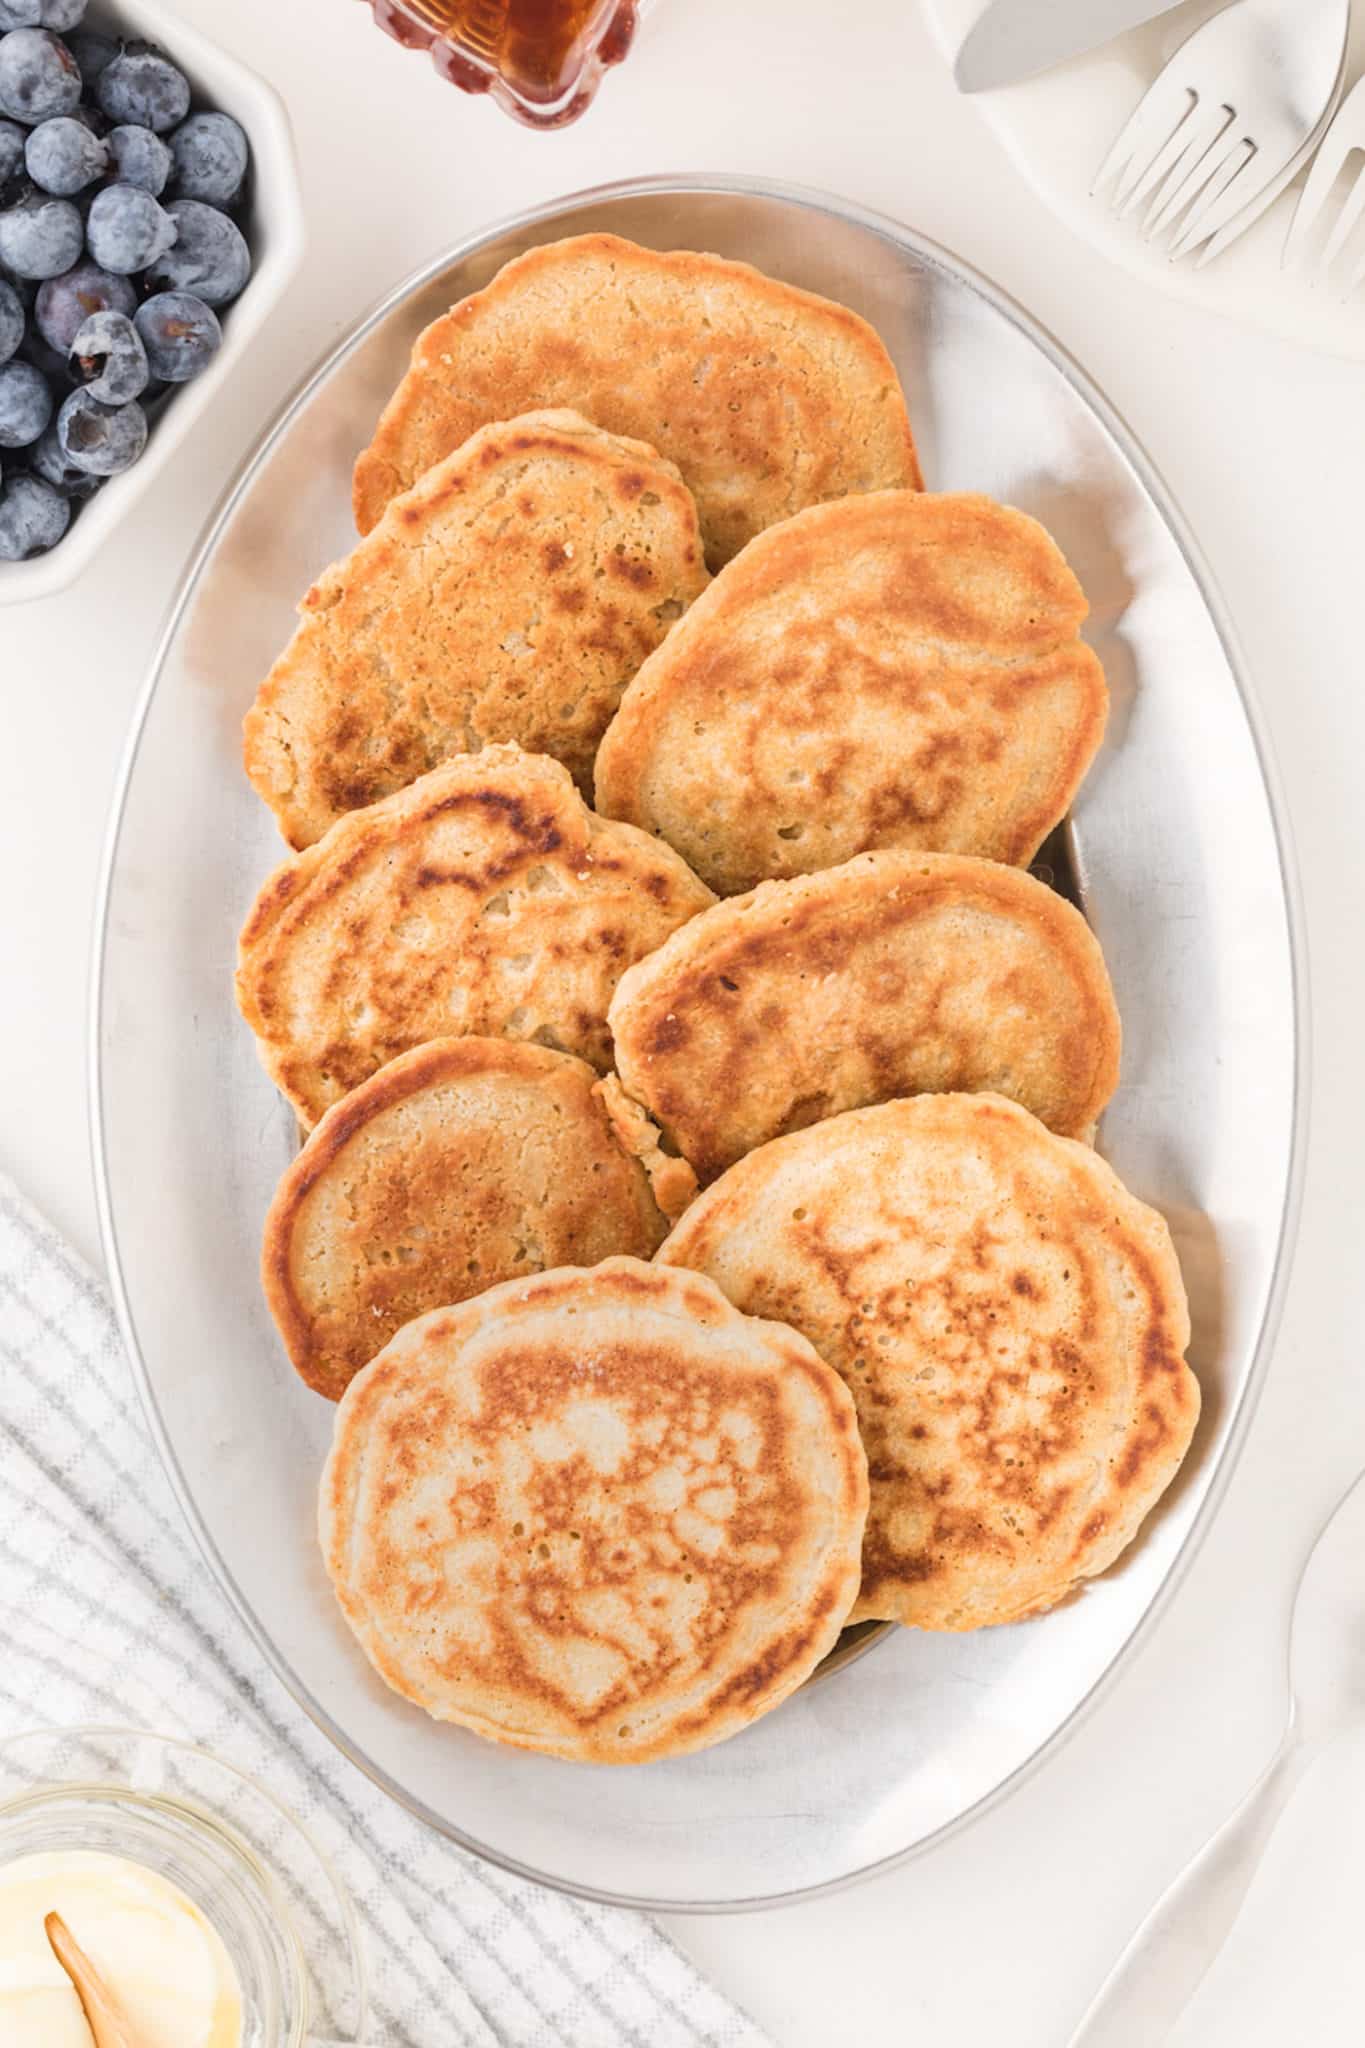 cooked oat flour pancakes on platter